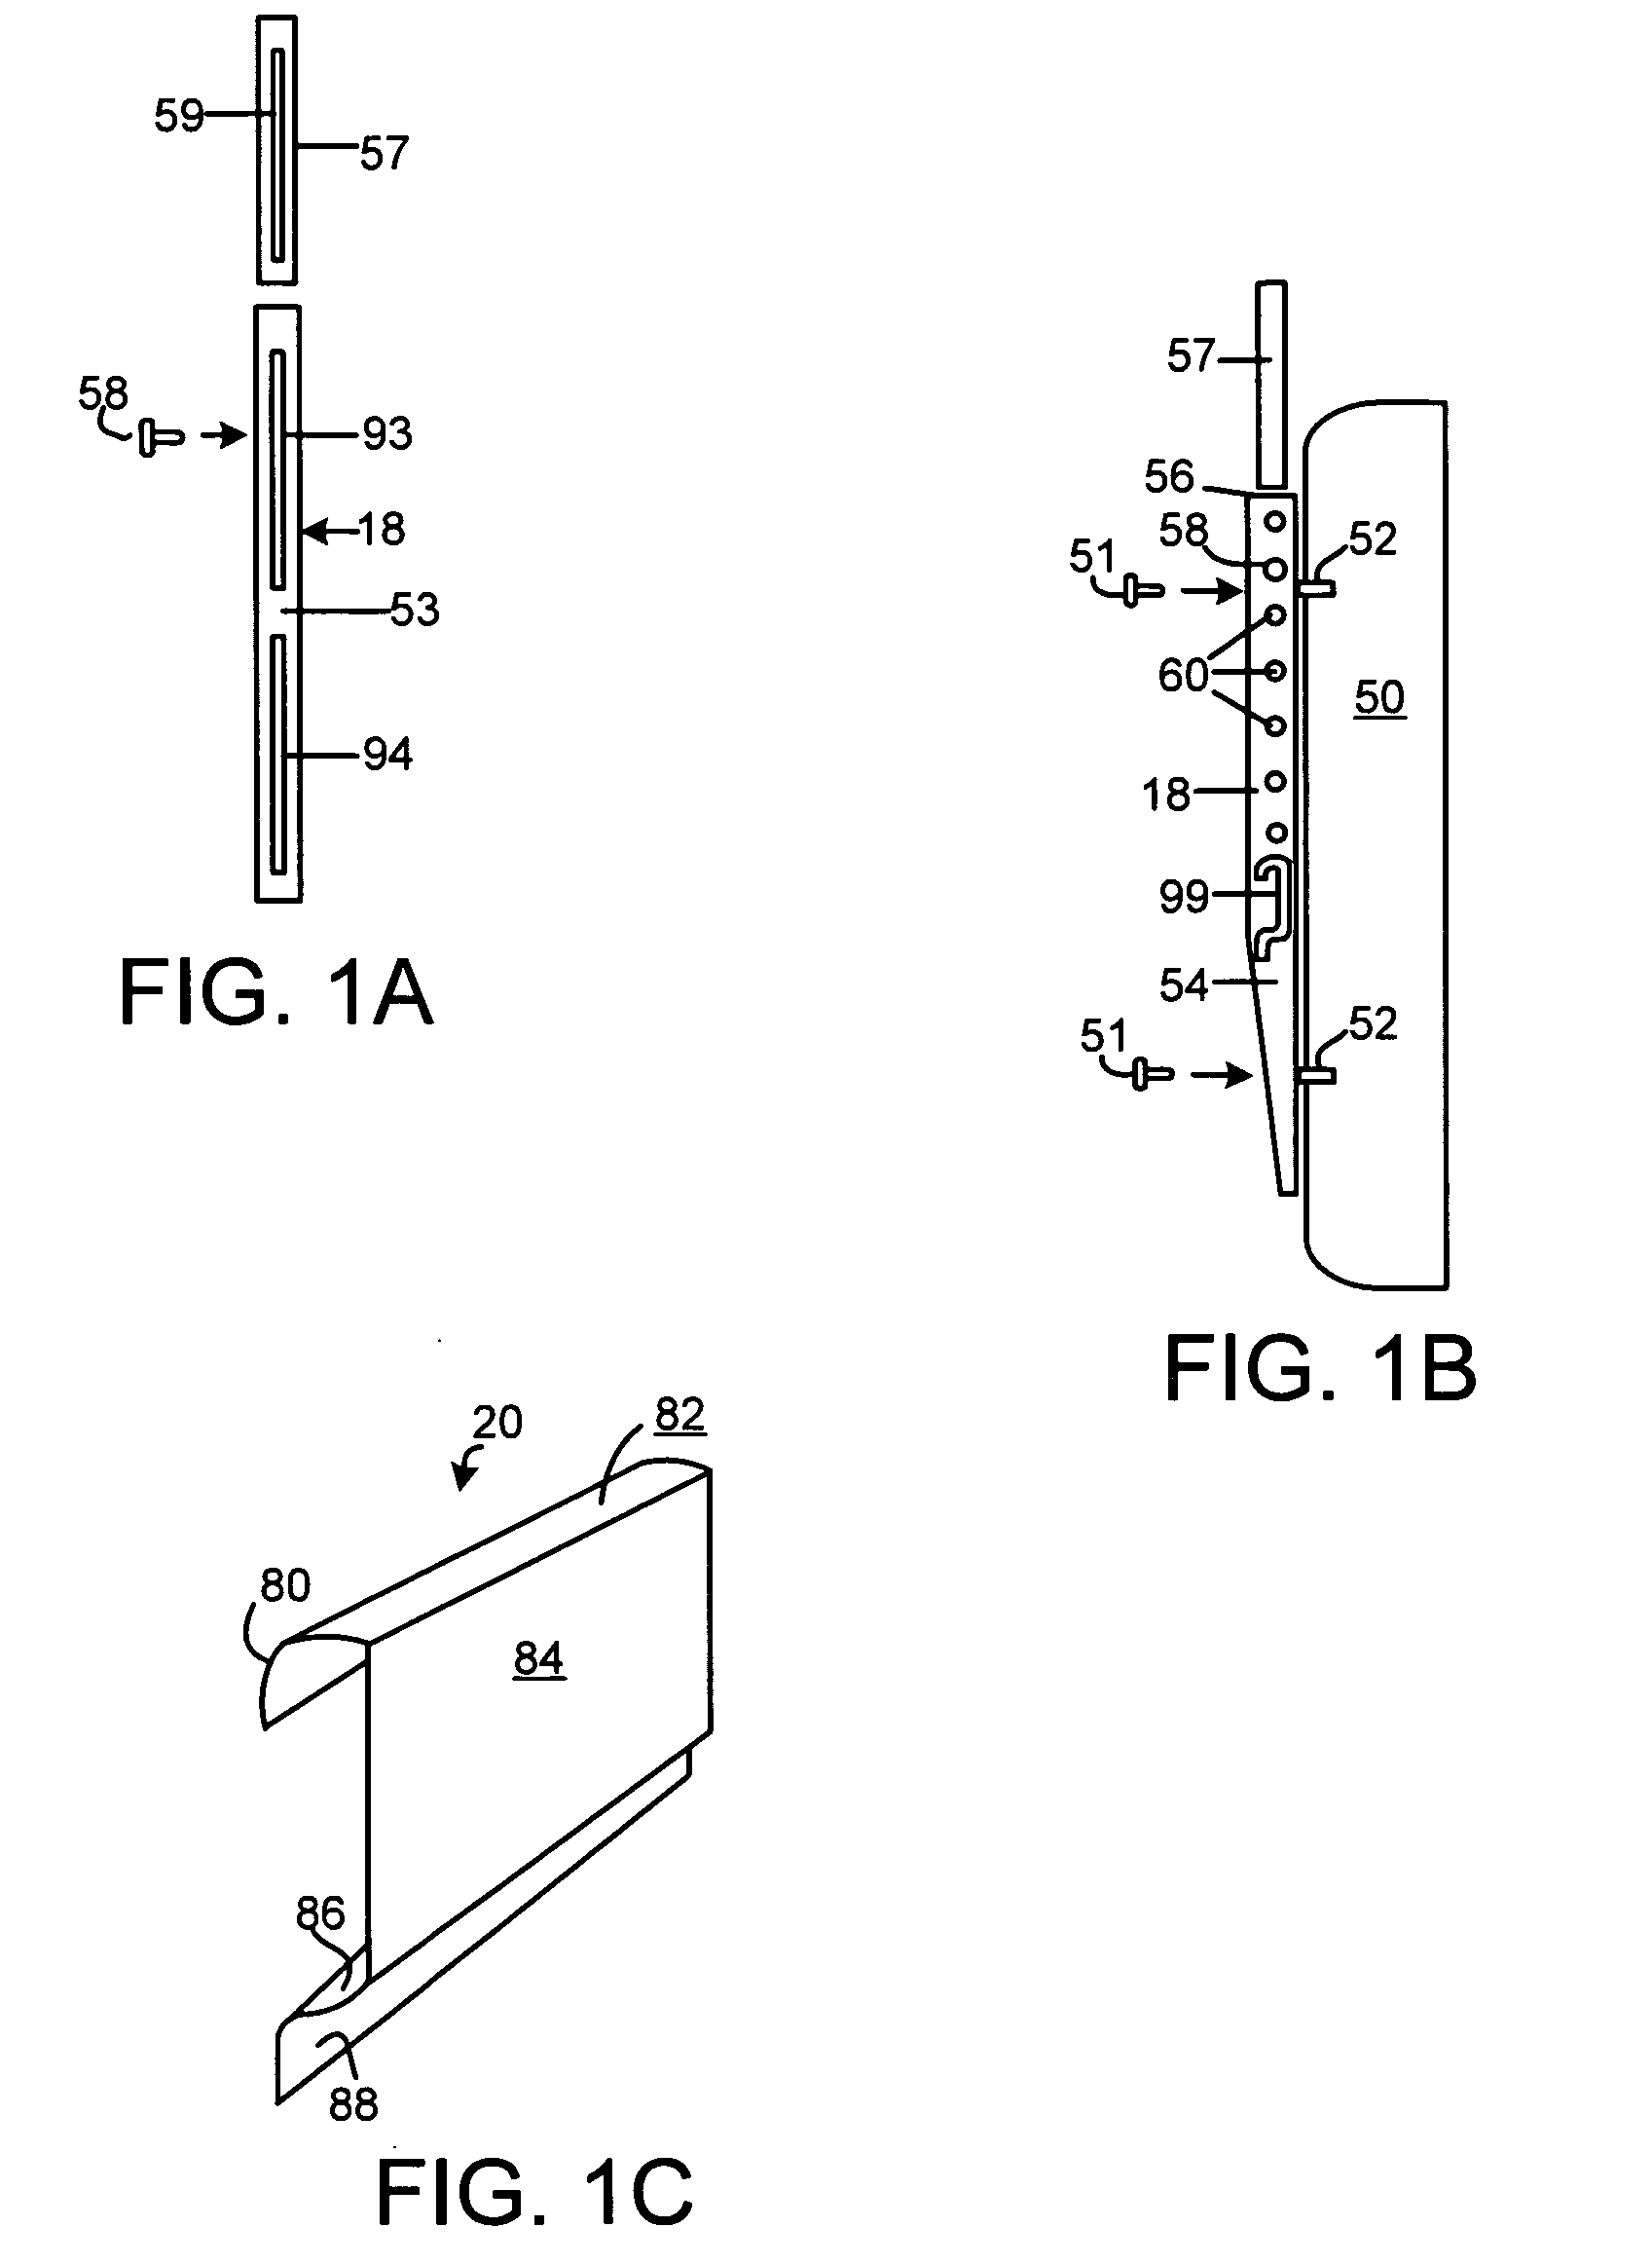 Flat panel display mounting apparatus and system